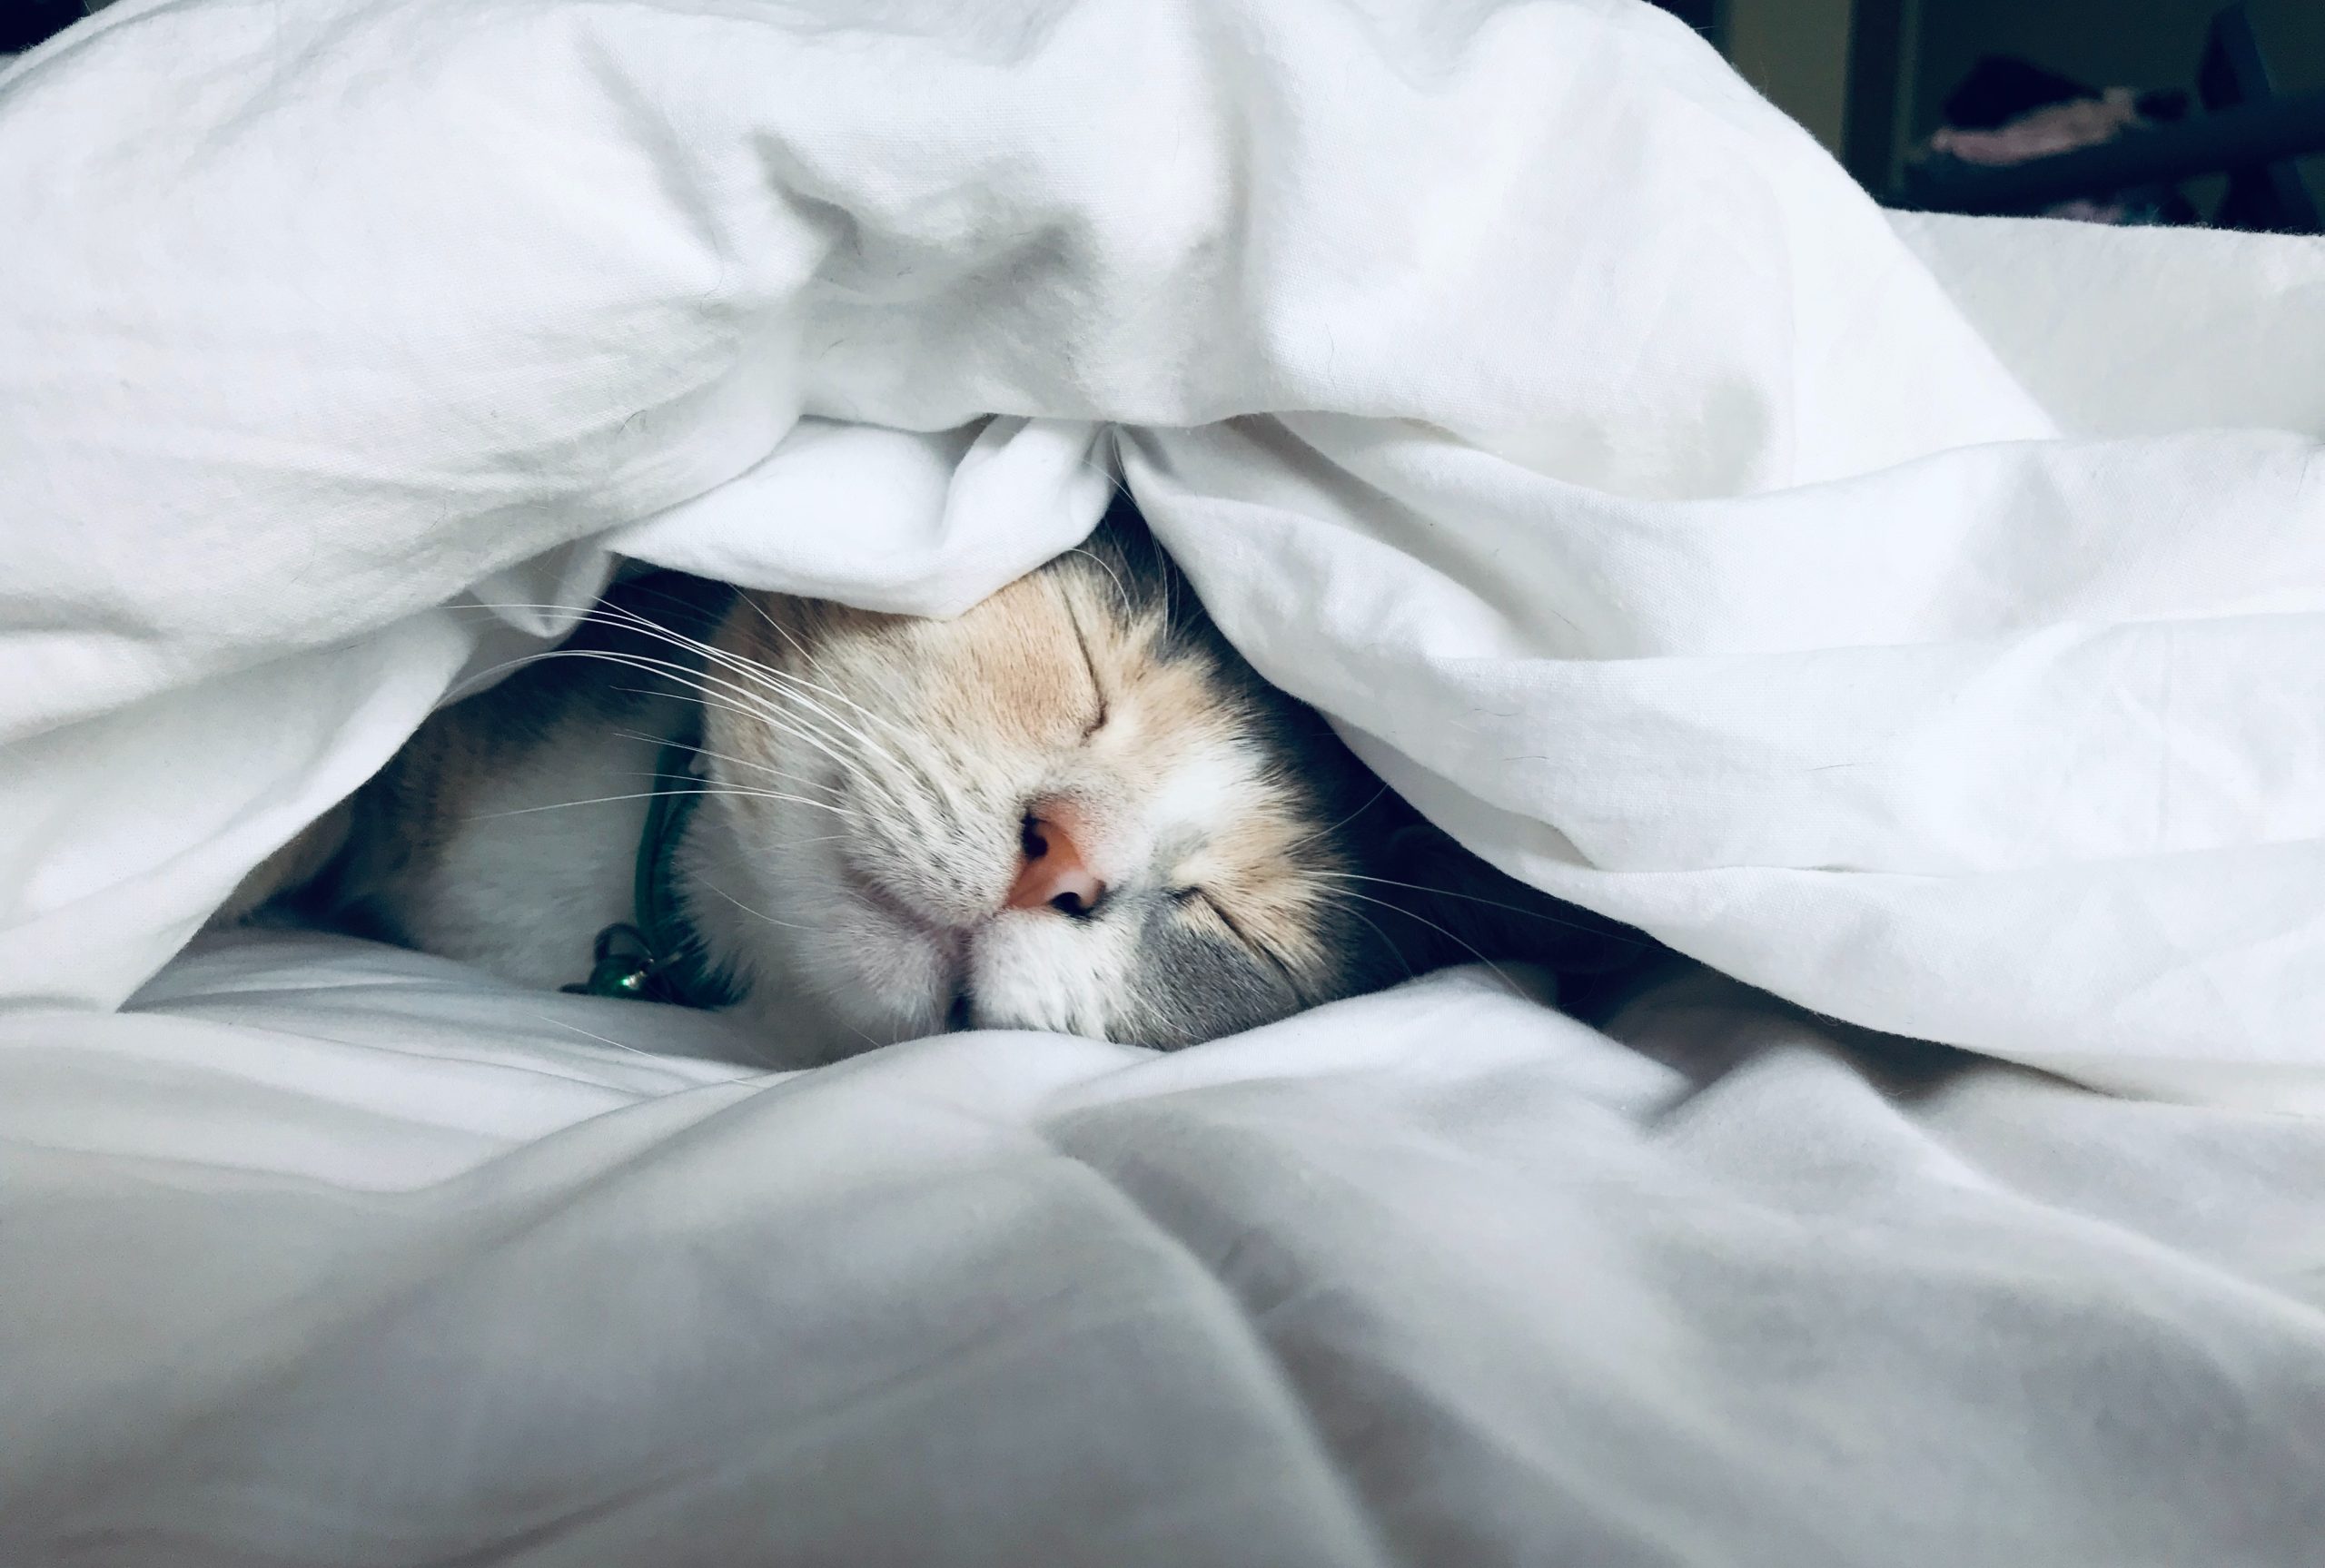 Cat under bed covers sleeping.